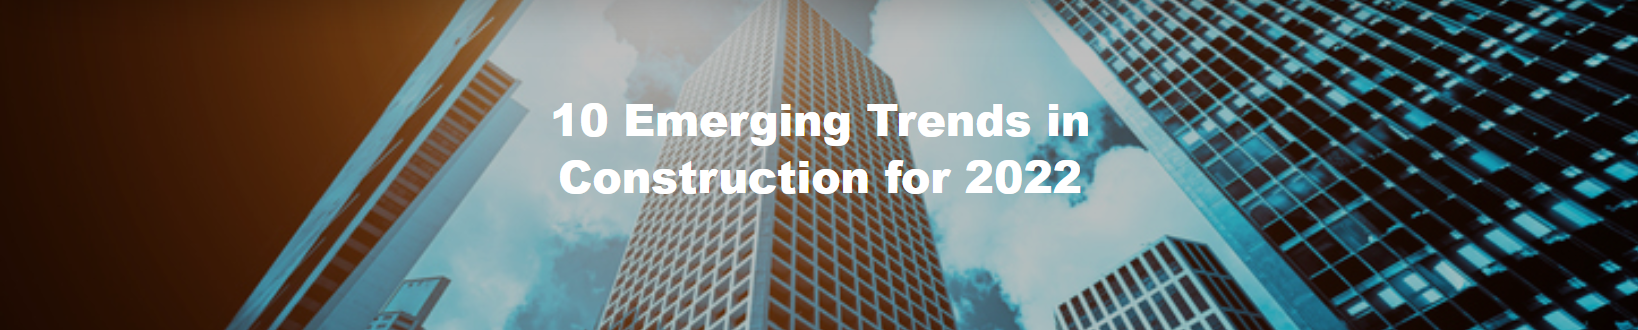 10 Emerging Trends in Construction for 2022